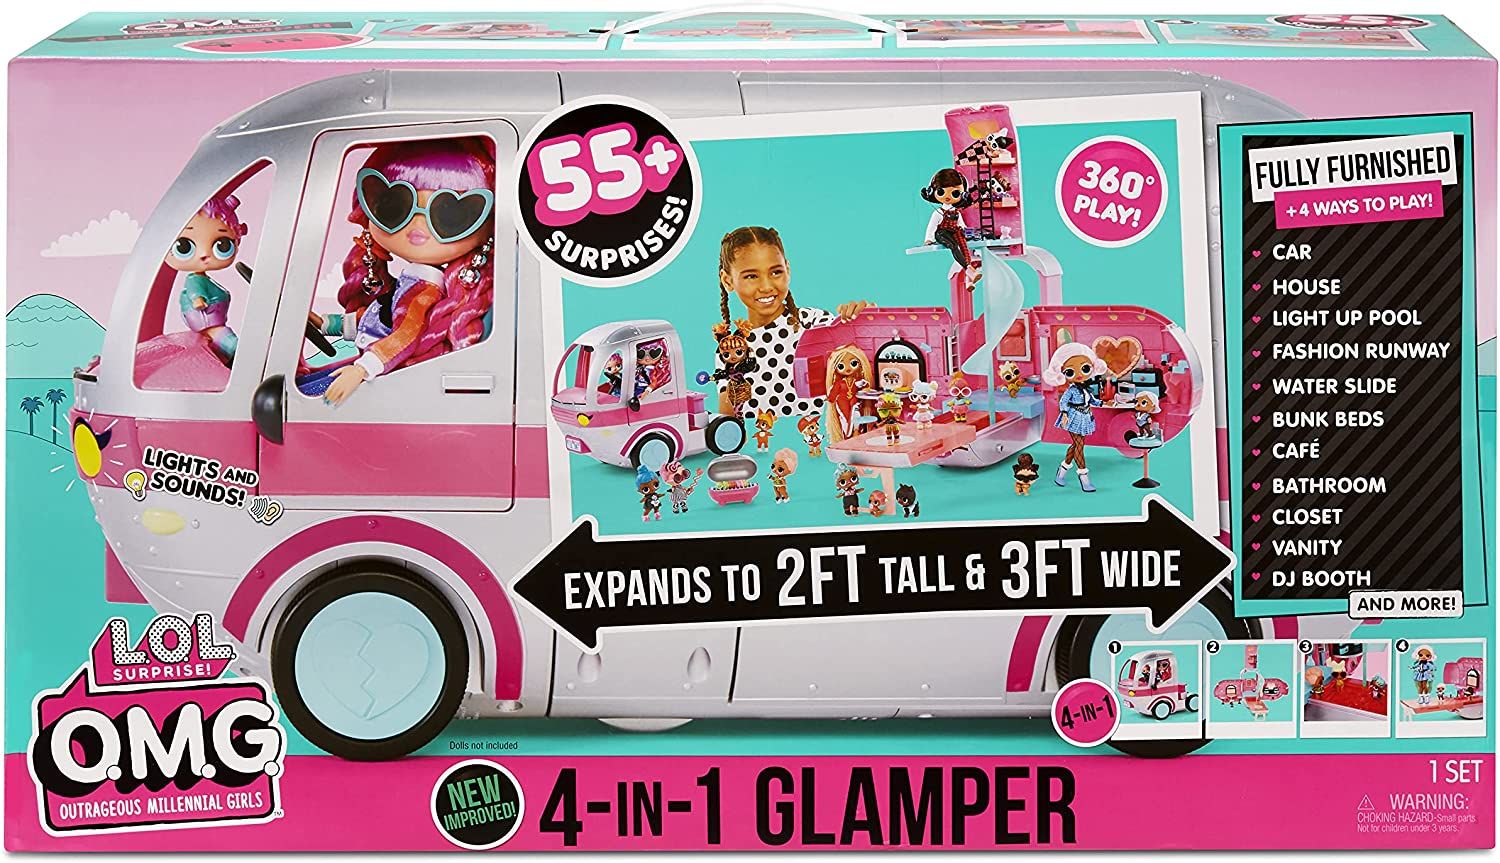 Null L.O.L. Surprise Motorhome! OMG Glamper 4 in 1 with +55 Surprises fully equi&hellip;